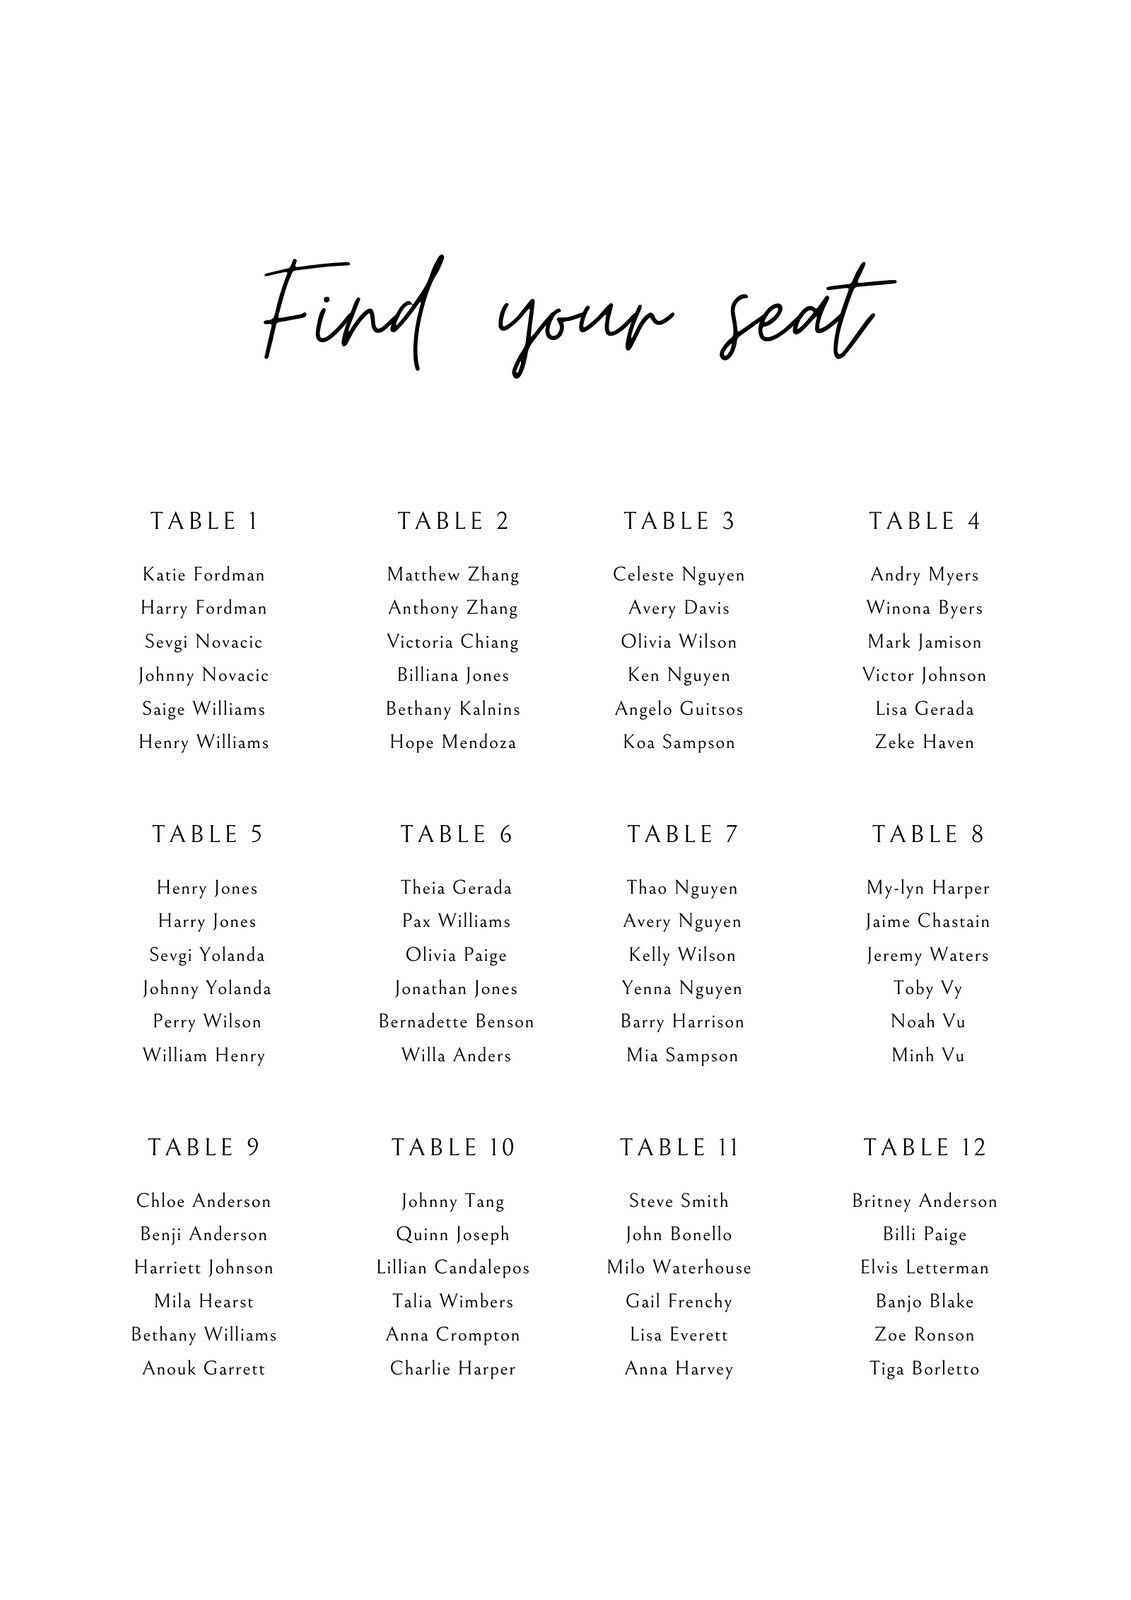 free-table-seating-chart-template-event-seating-chart-seating-chart